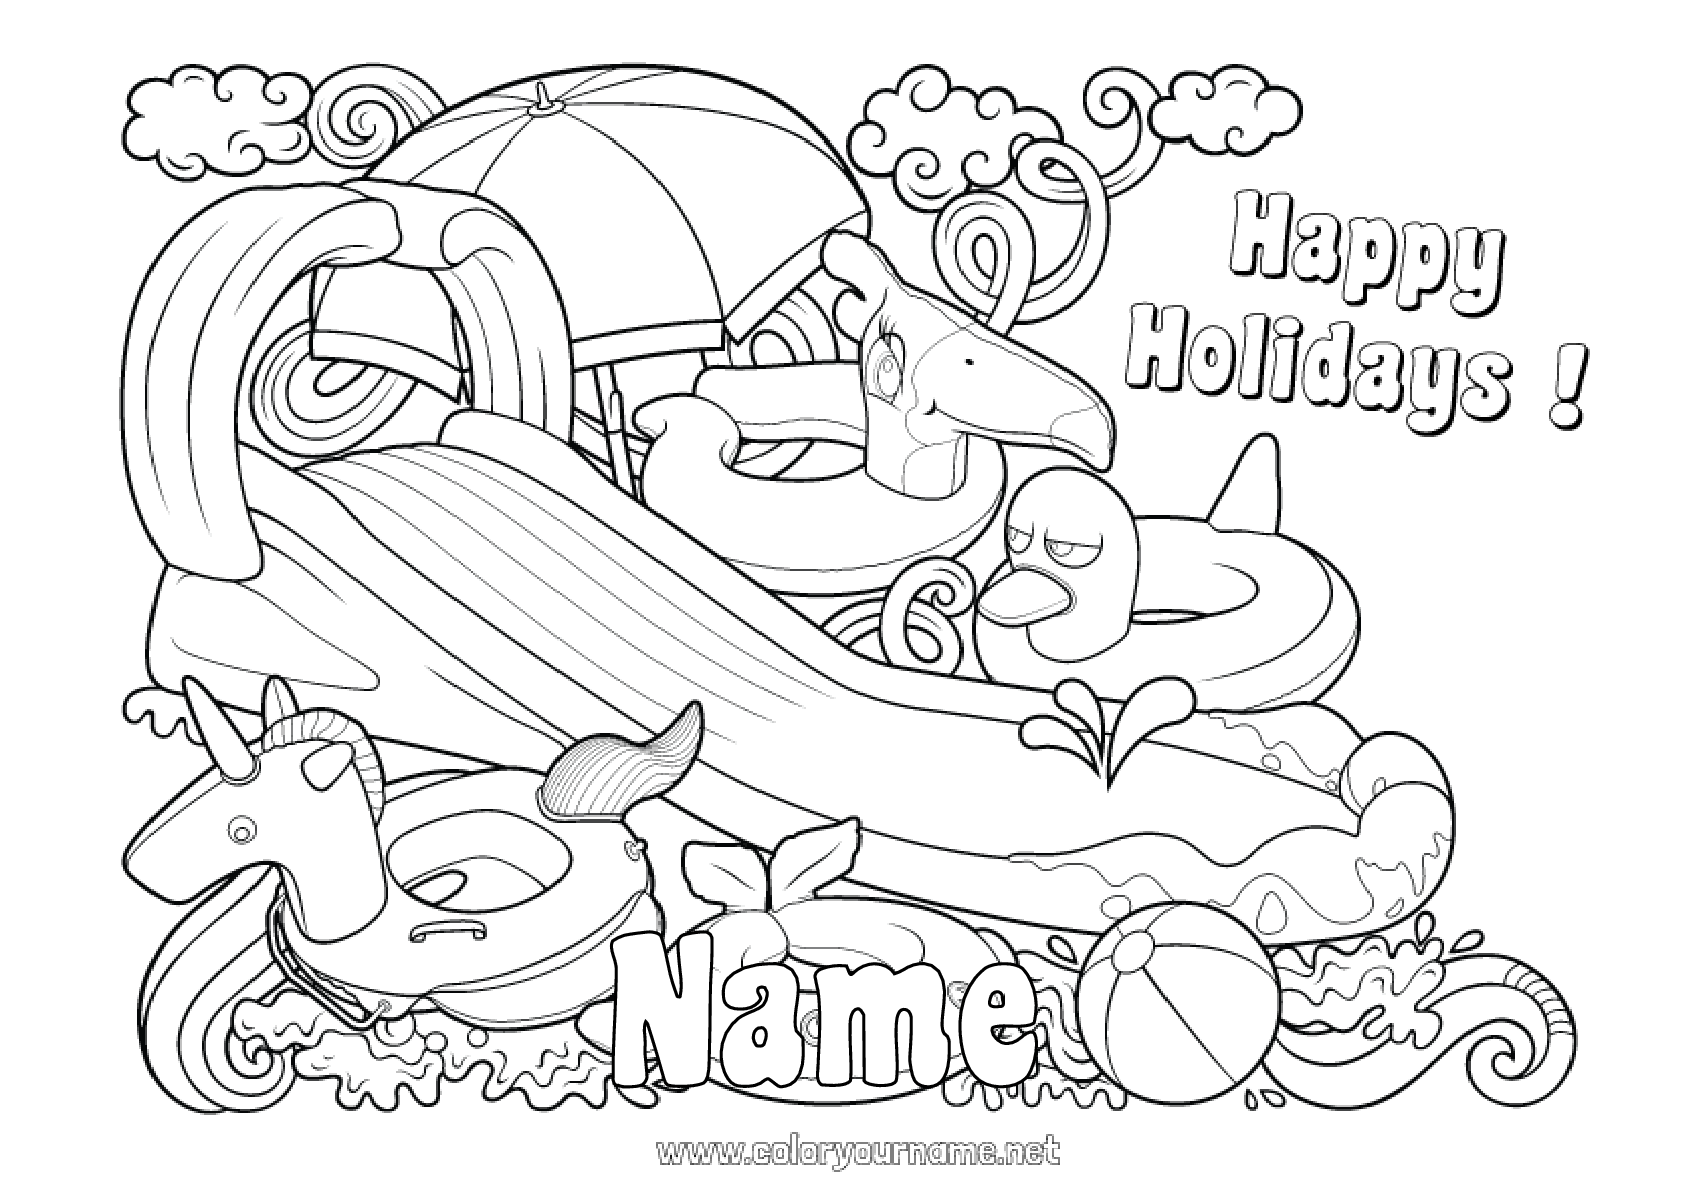 Coloring page No.1952 - Unicorn Summer Toys